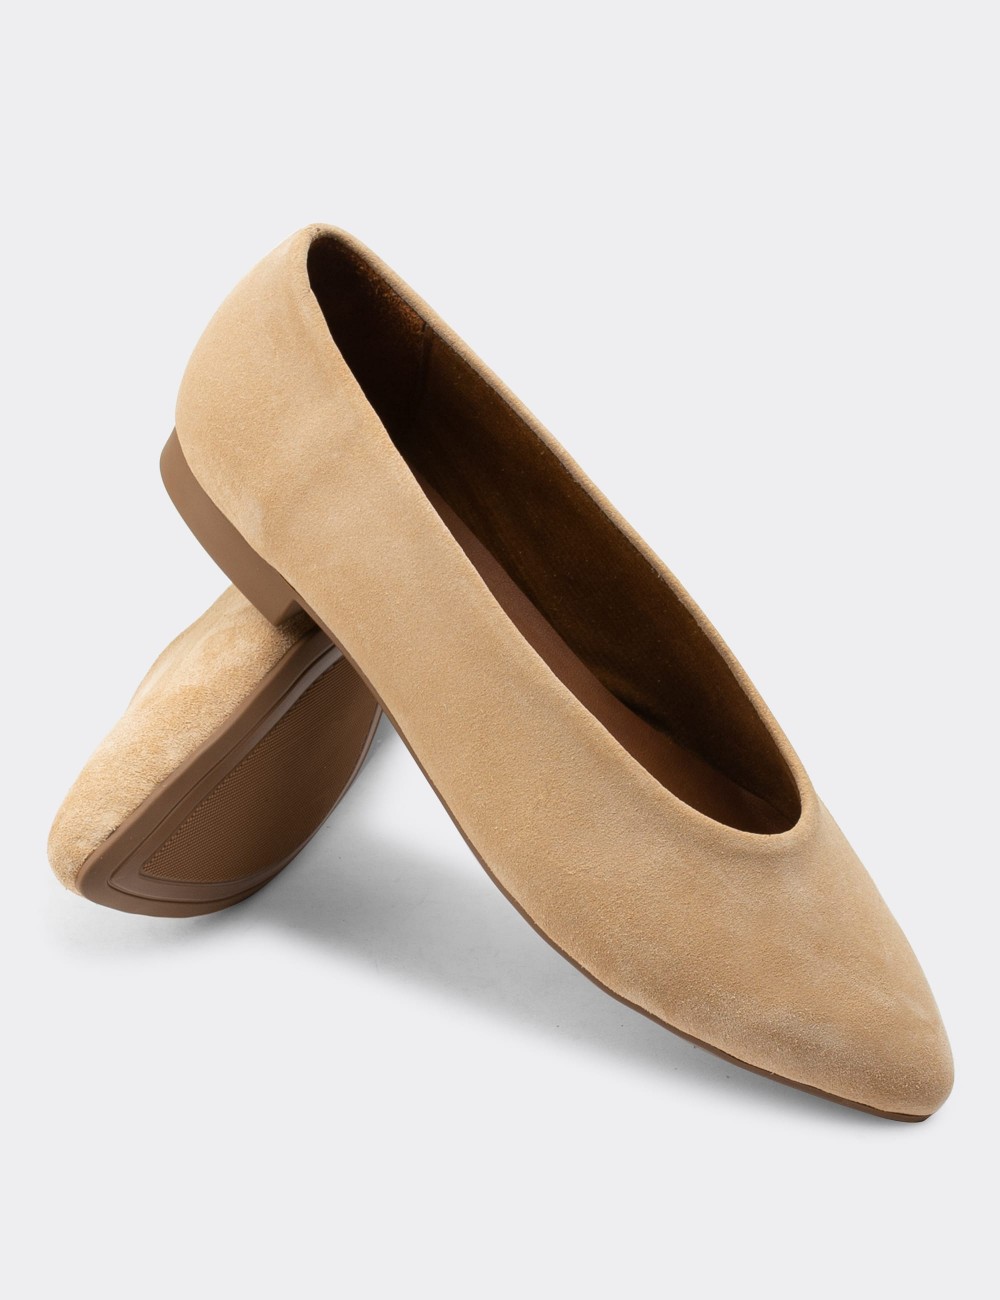 Beige Suede Leather Loafers - 01896ZBEJC01